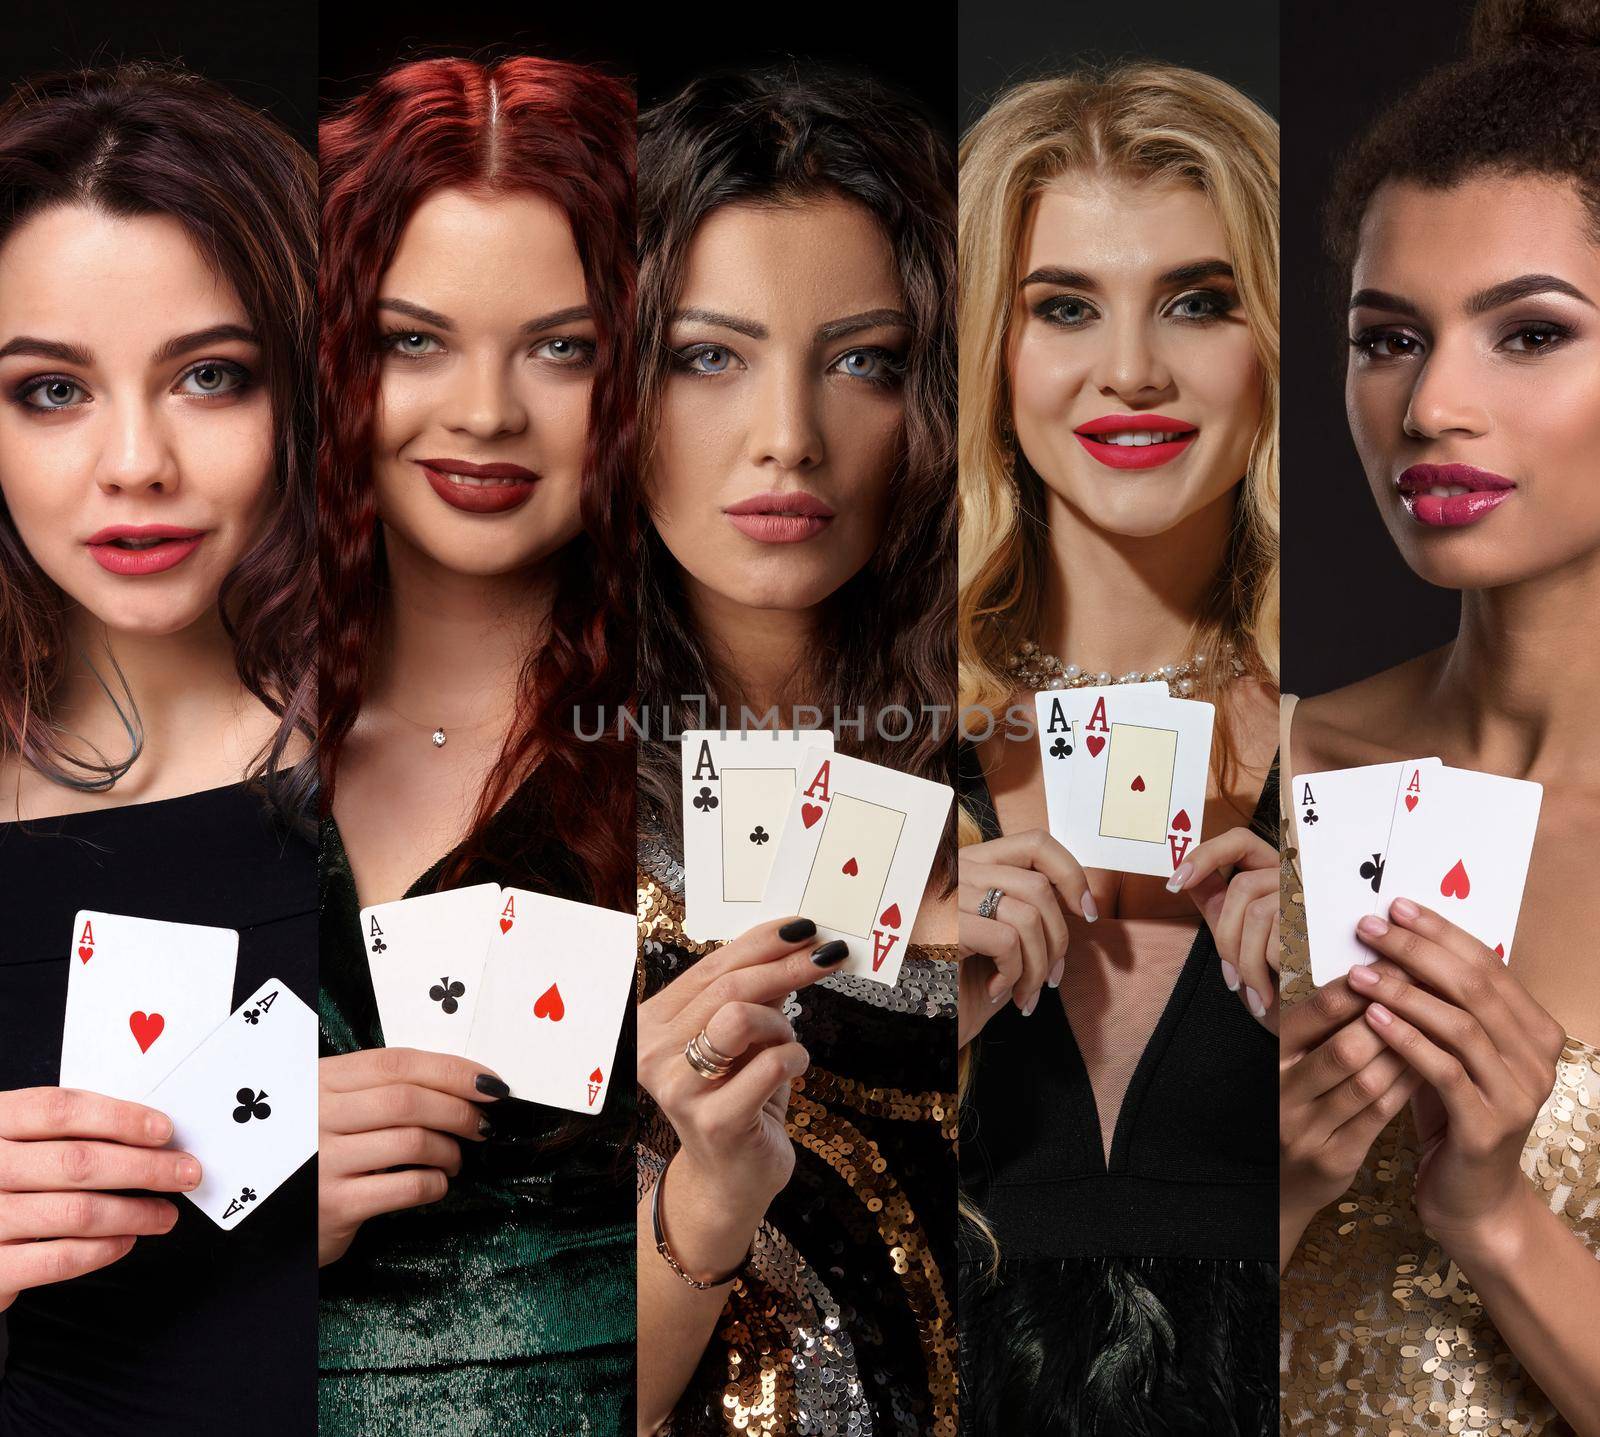 Collage of five alluring females with bright make-up, in stylish dresses and jewelry. They smiling and showing aces while posing against colorful backgrounds. Gambling, poker, casino. Close-up